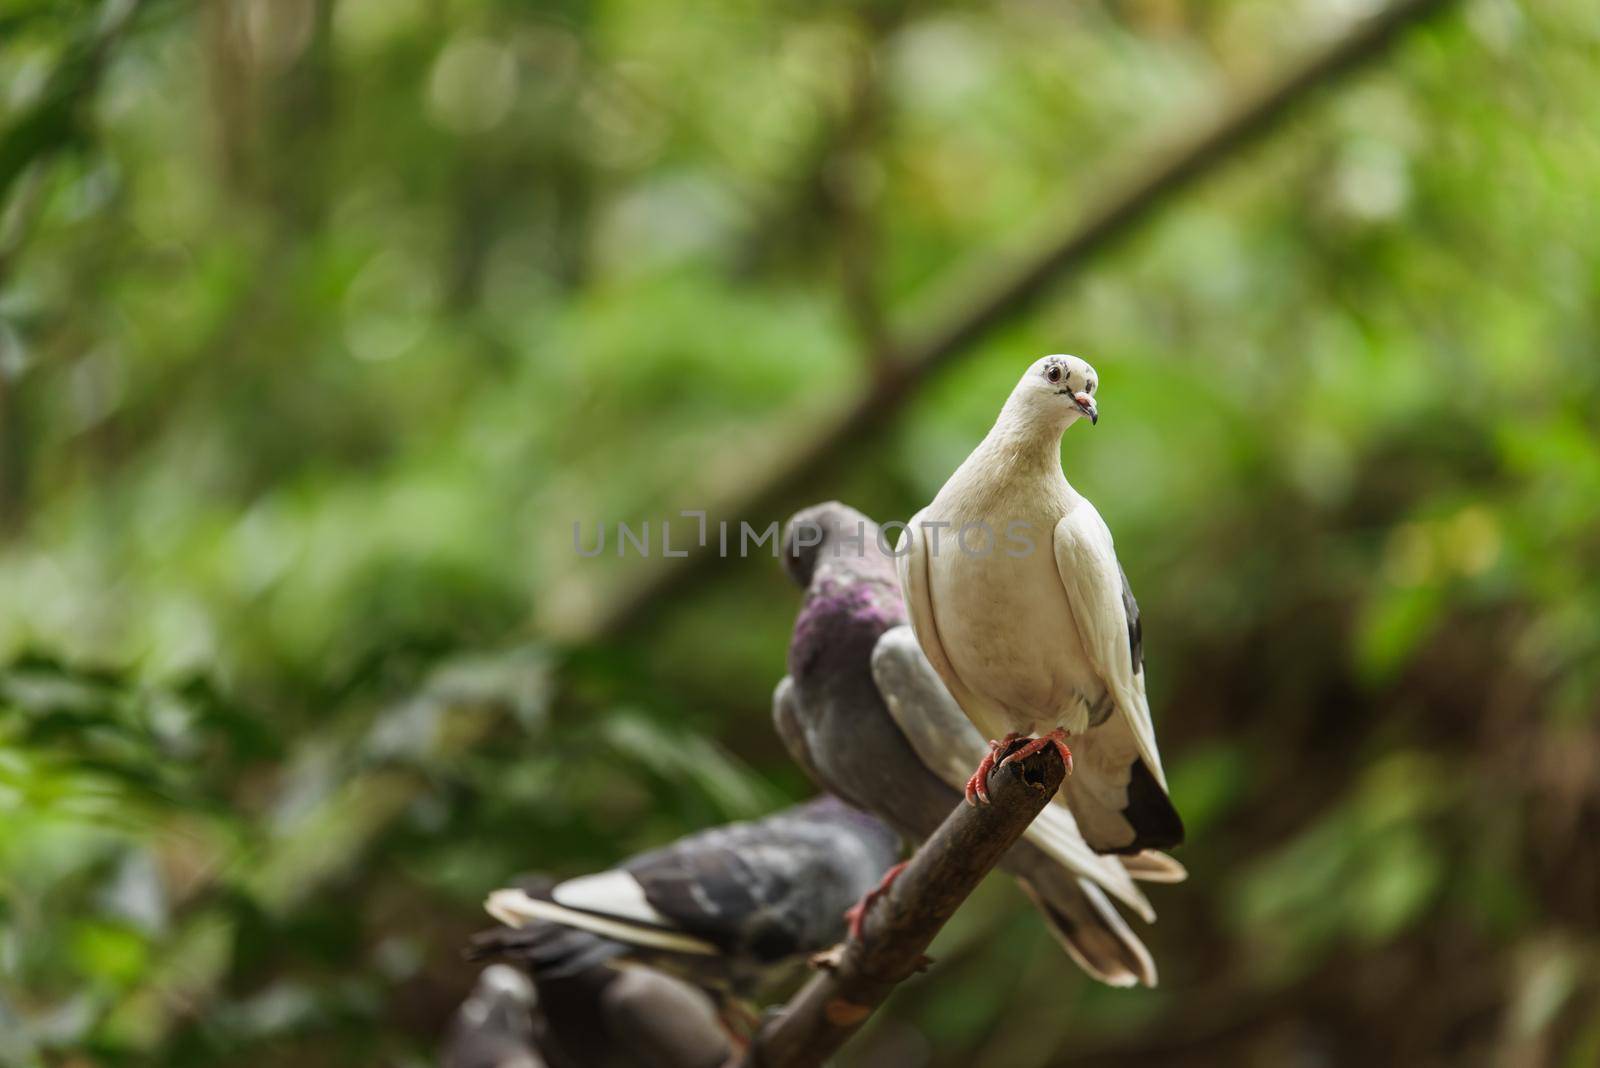 Pigeon perched on the tree branch by Wmpix